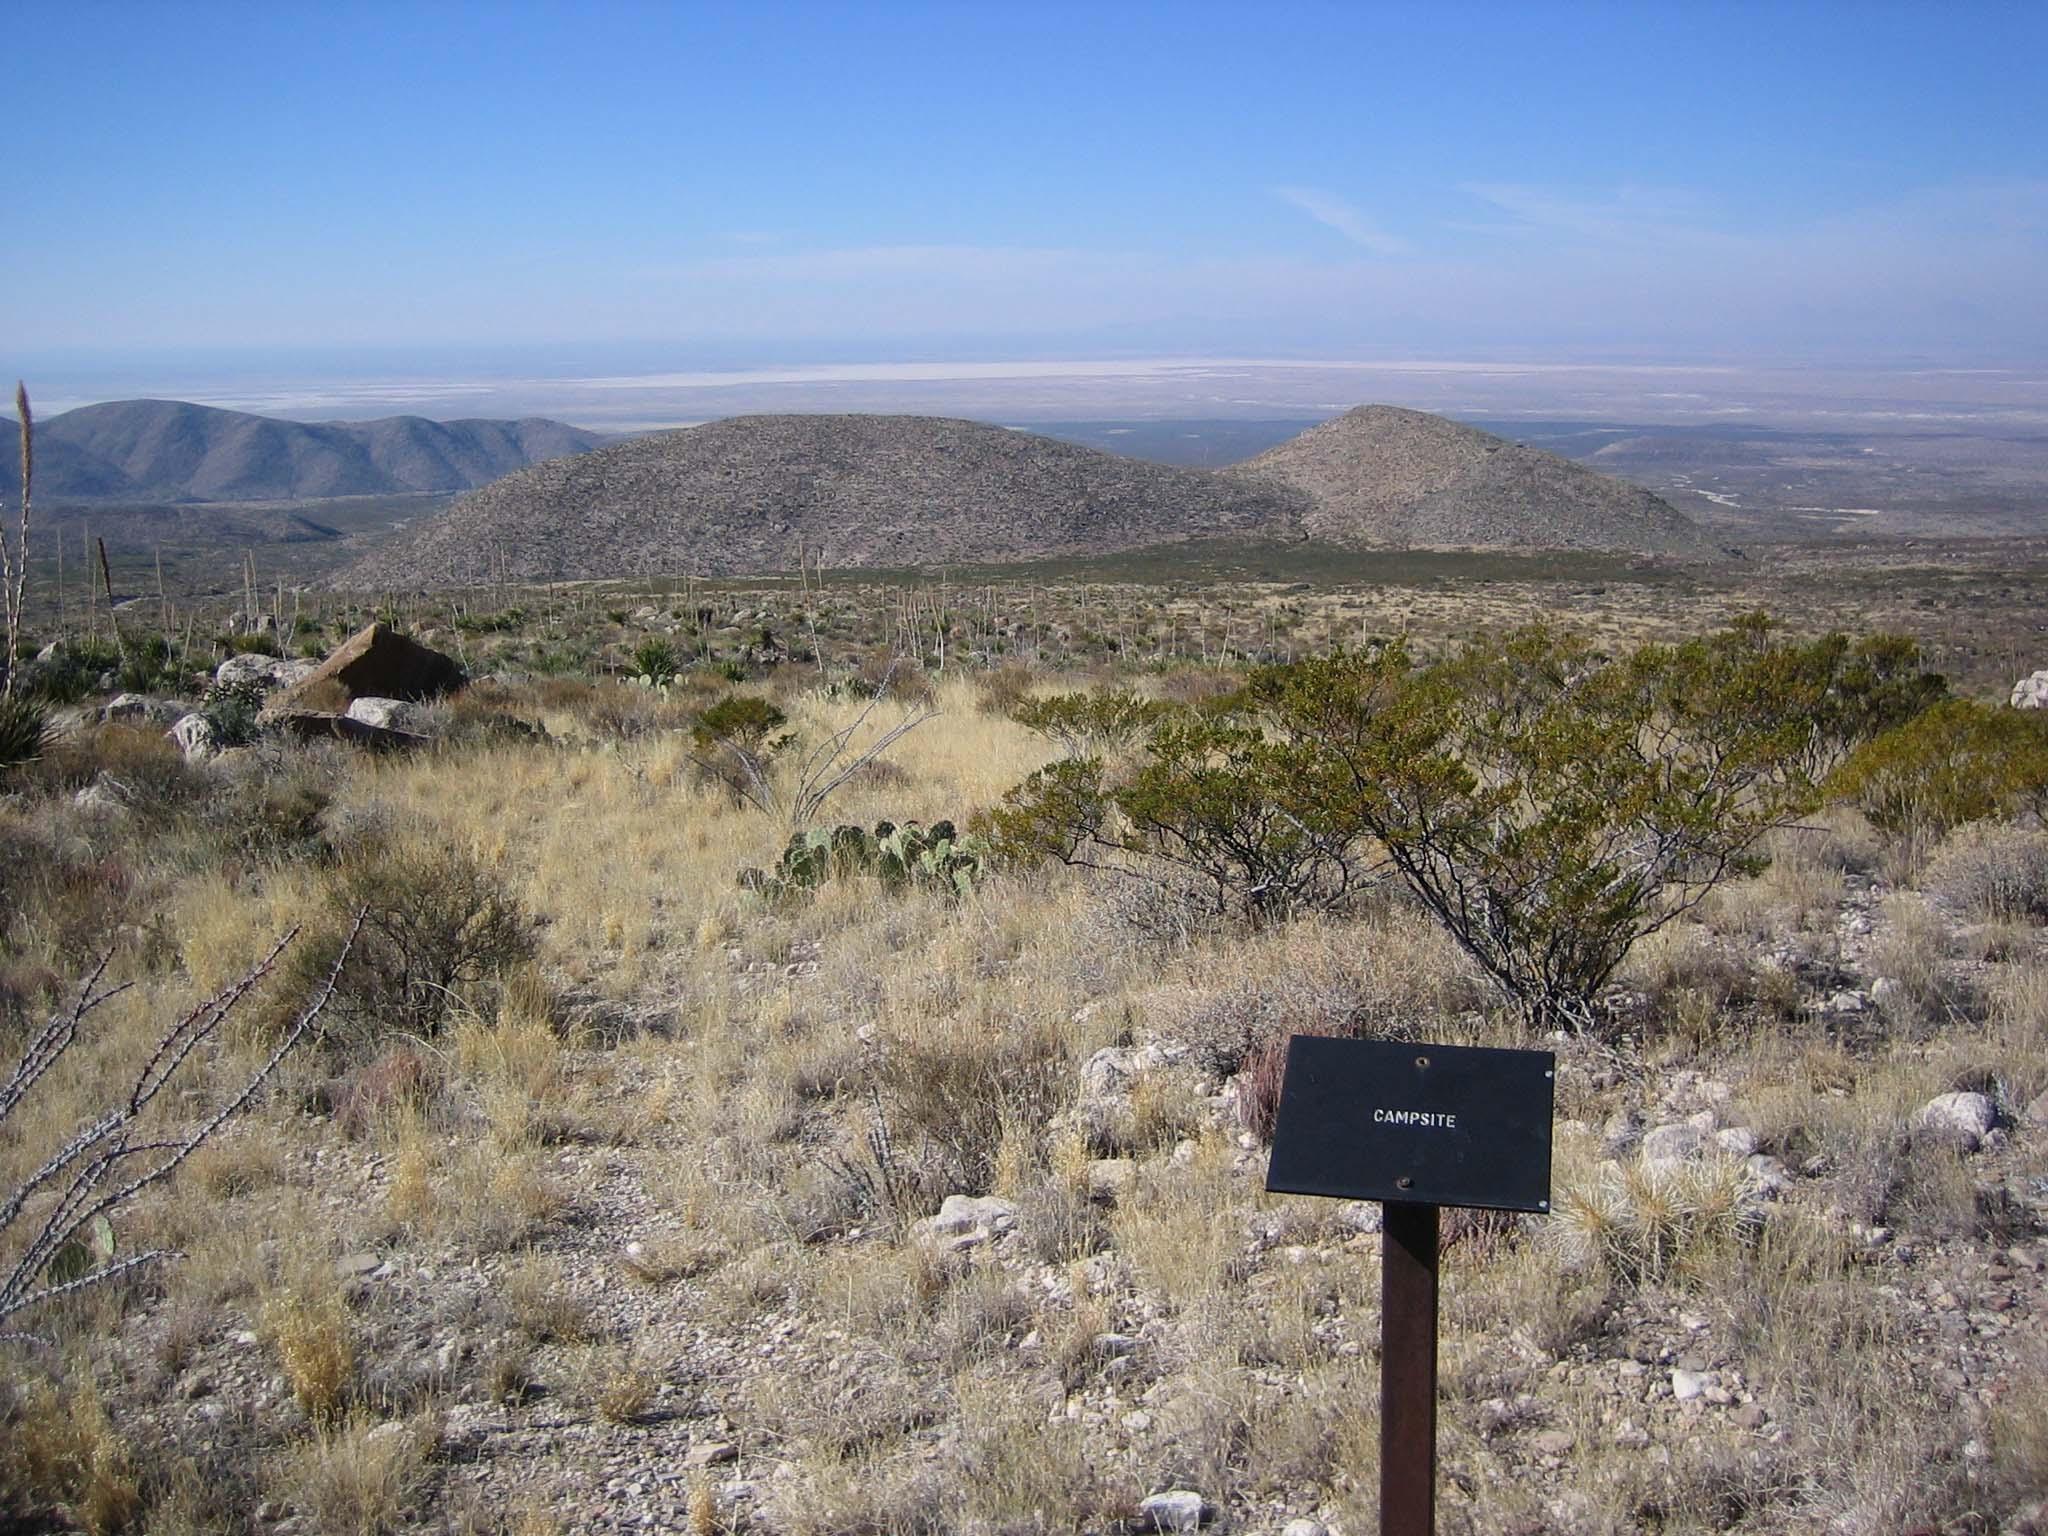 A metal sign marking the camping area rises above the desert landscape.